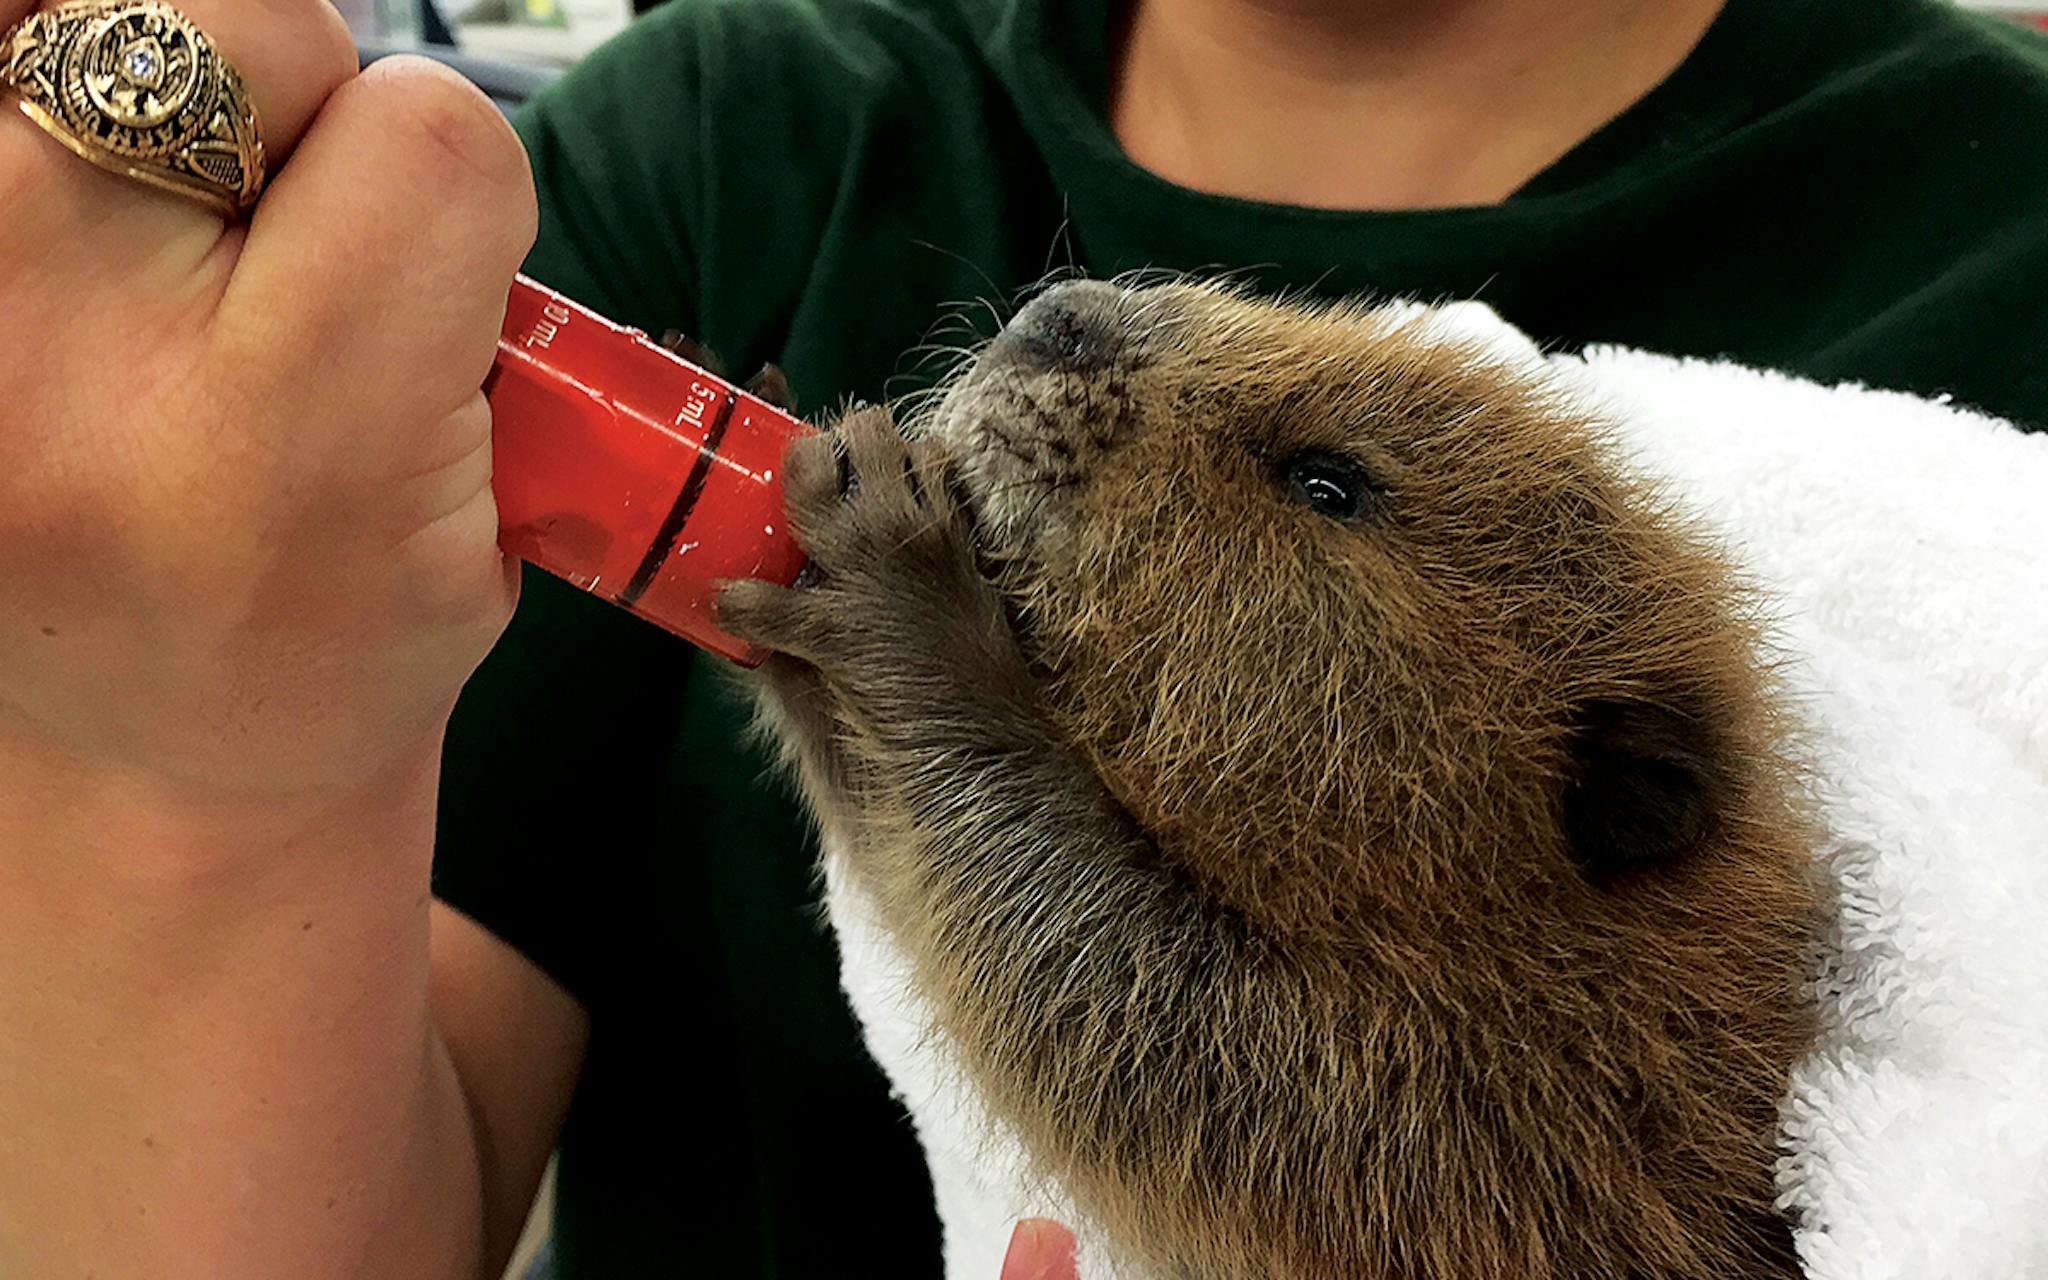 Baby beacer being fed through a syringe.